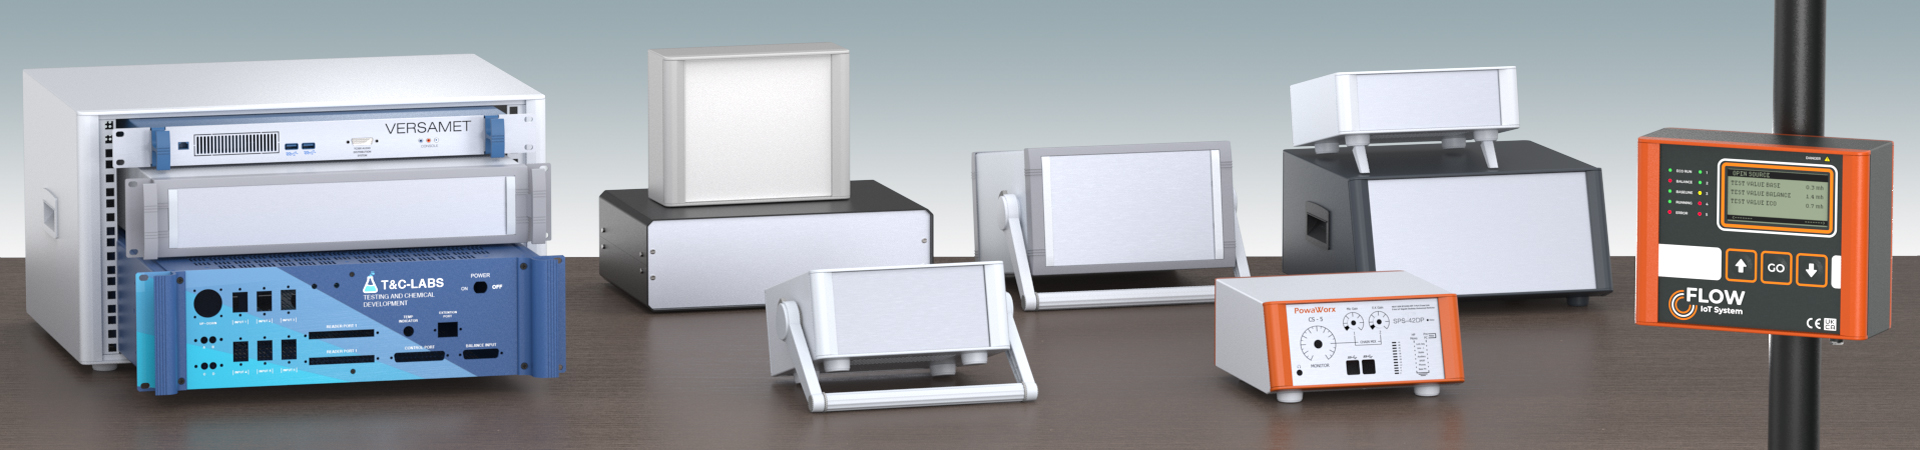 METCASE metal instrument enclosures, 19 inch rack cases and customized enclosures for modern OEM electronics.